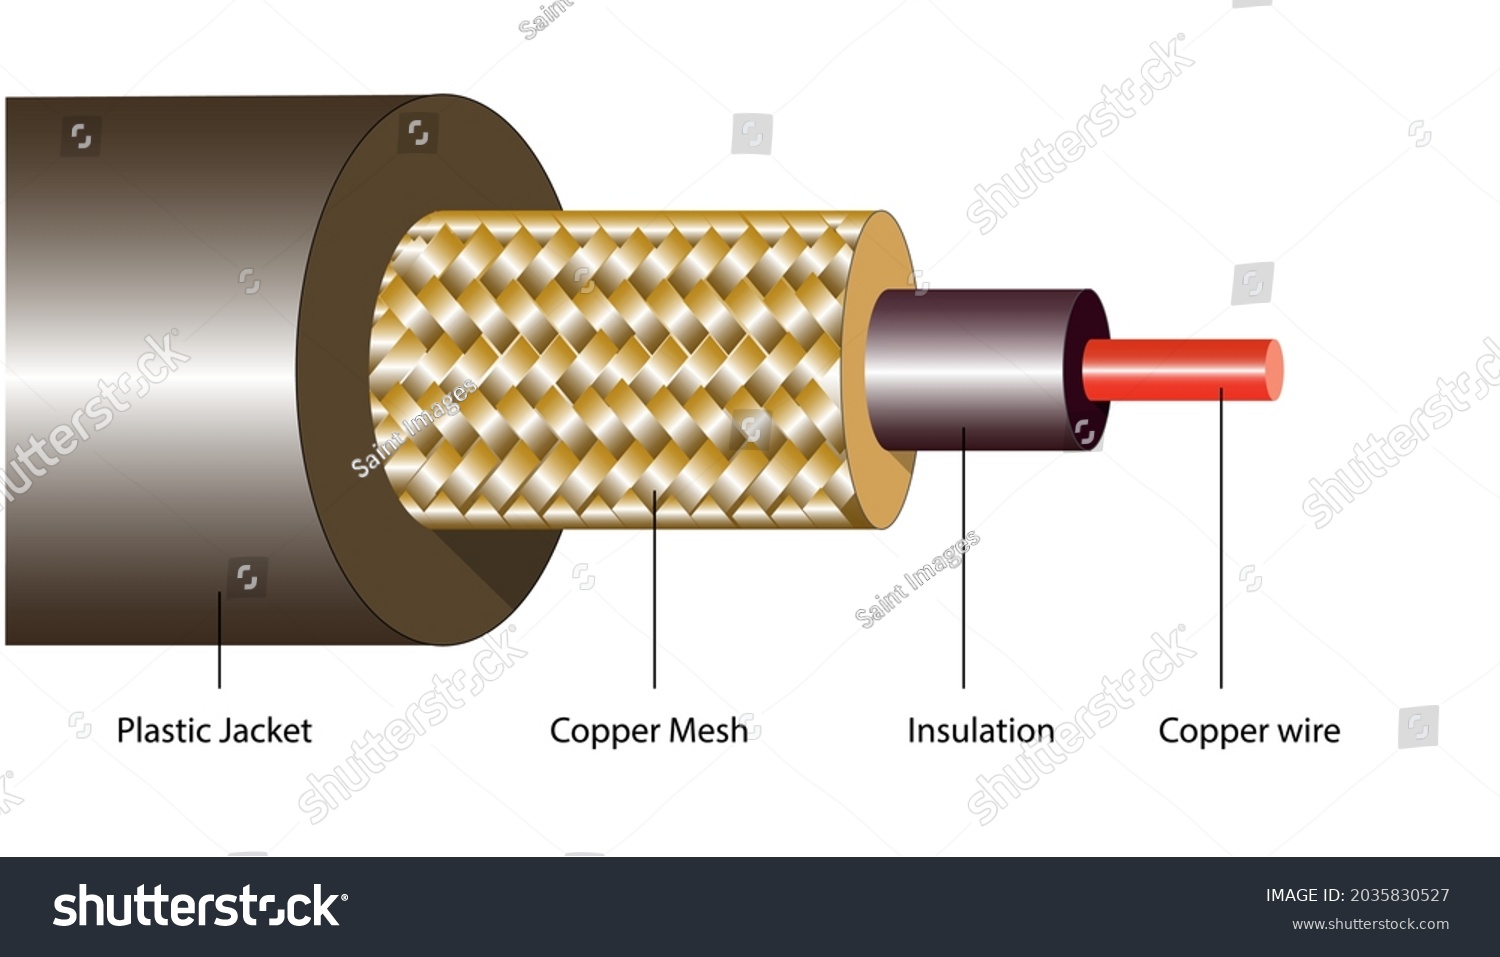 diagram of the parts of a coaxial cable #2035830527